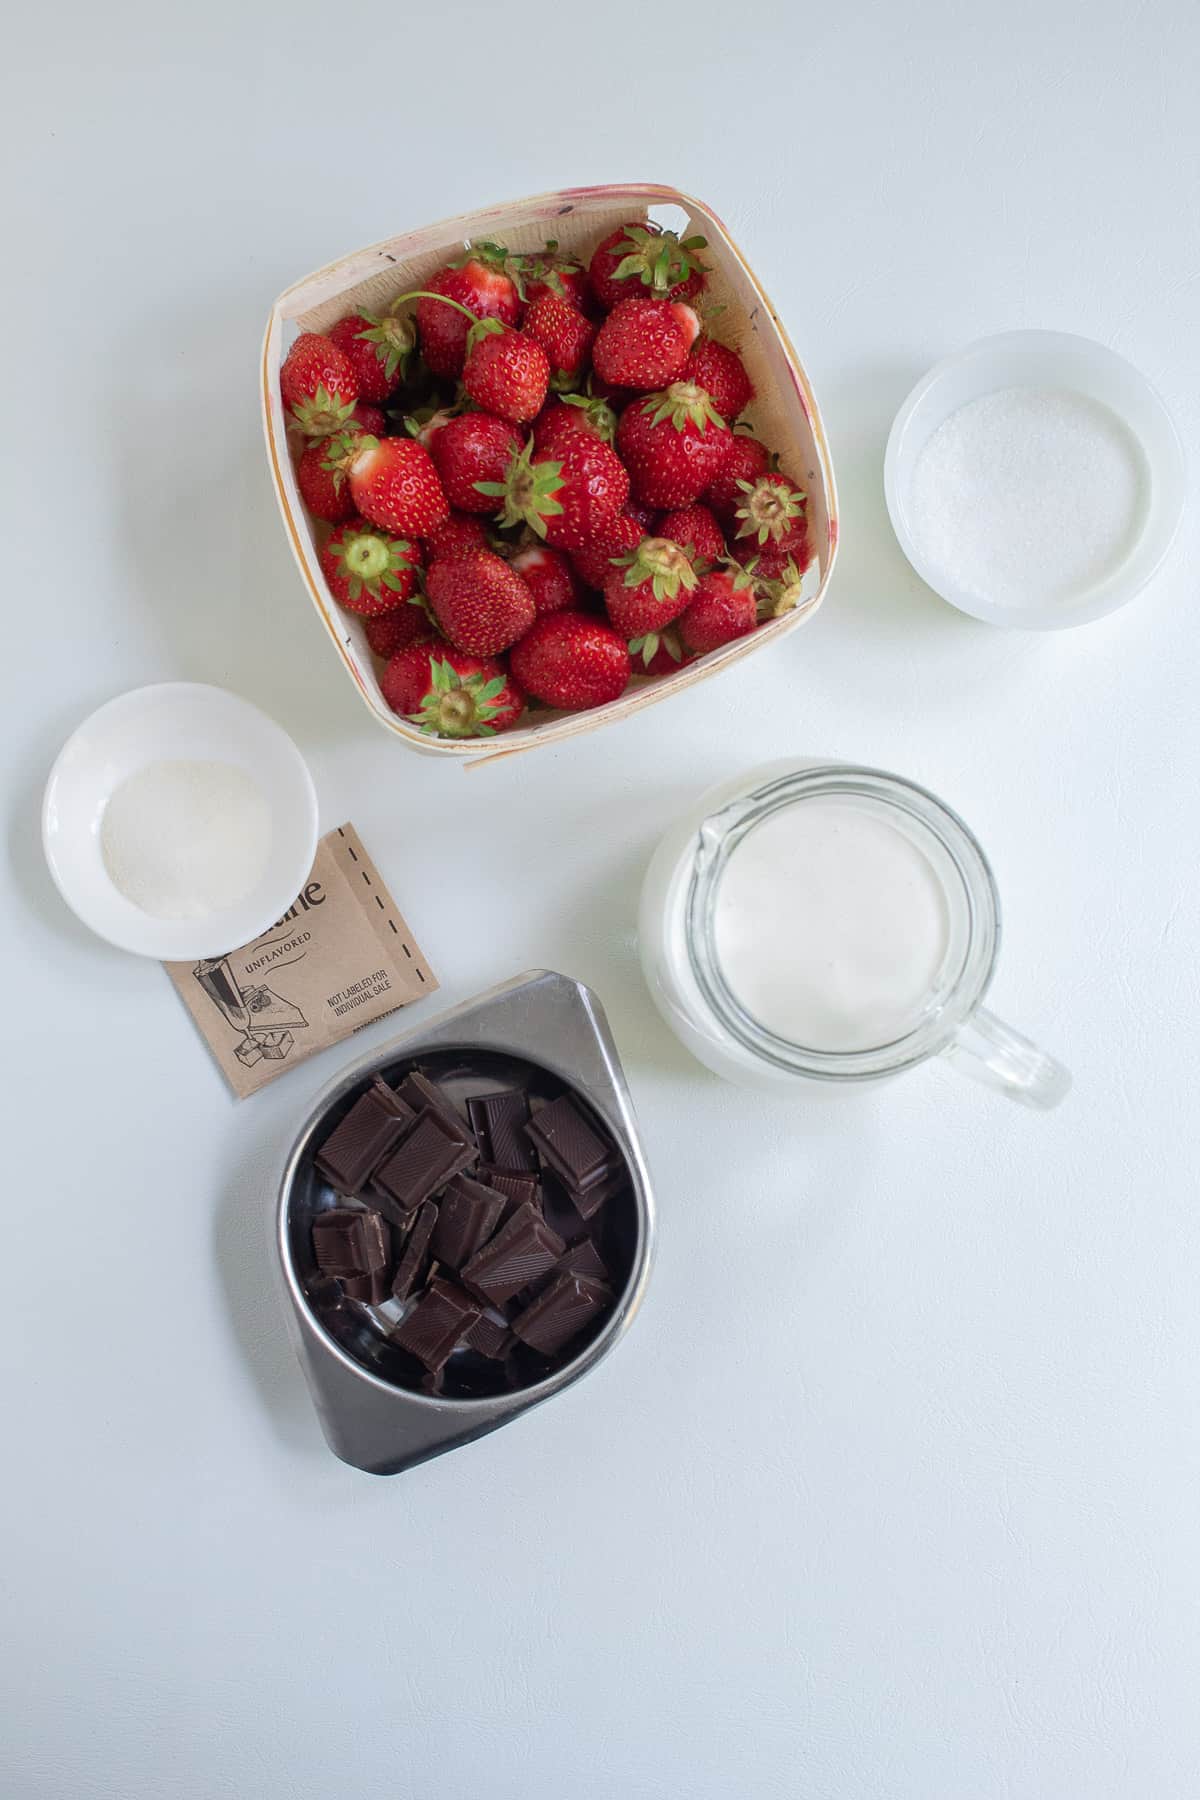 The ingredients for the mousse recipe are arranged on a white surface.